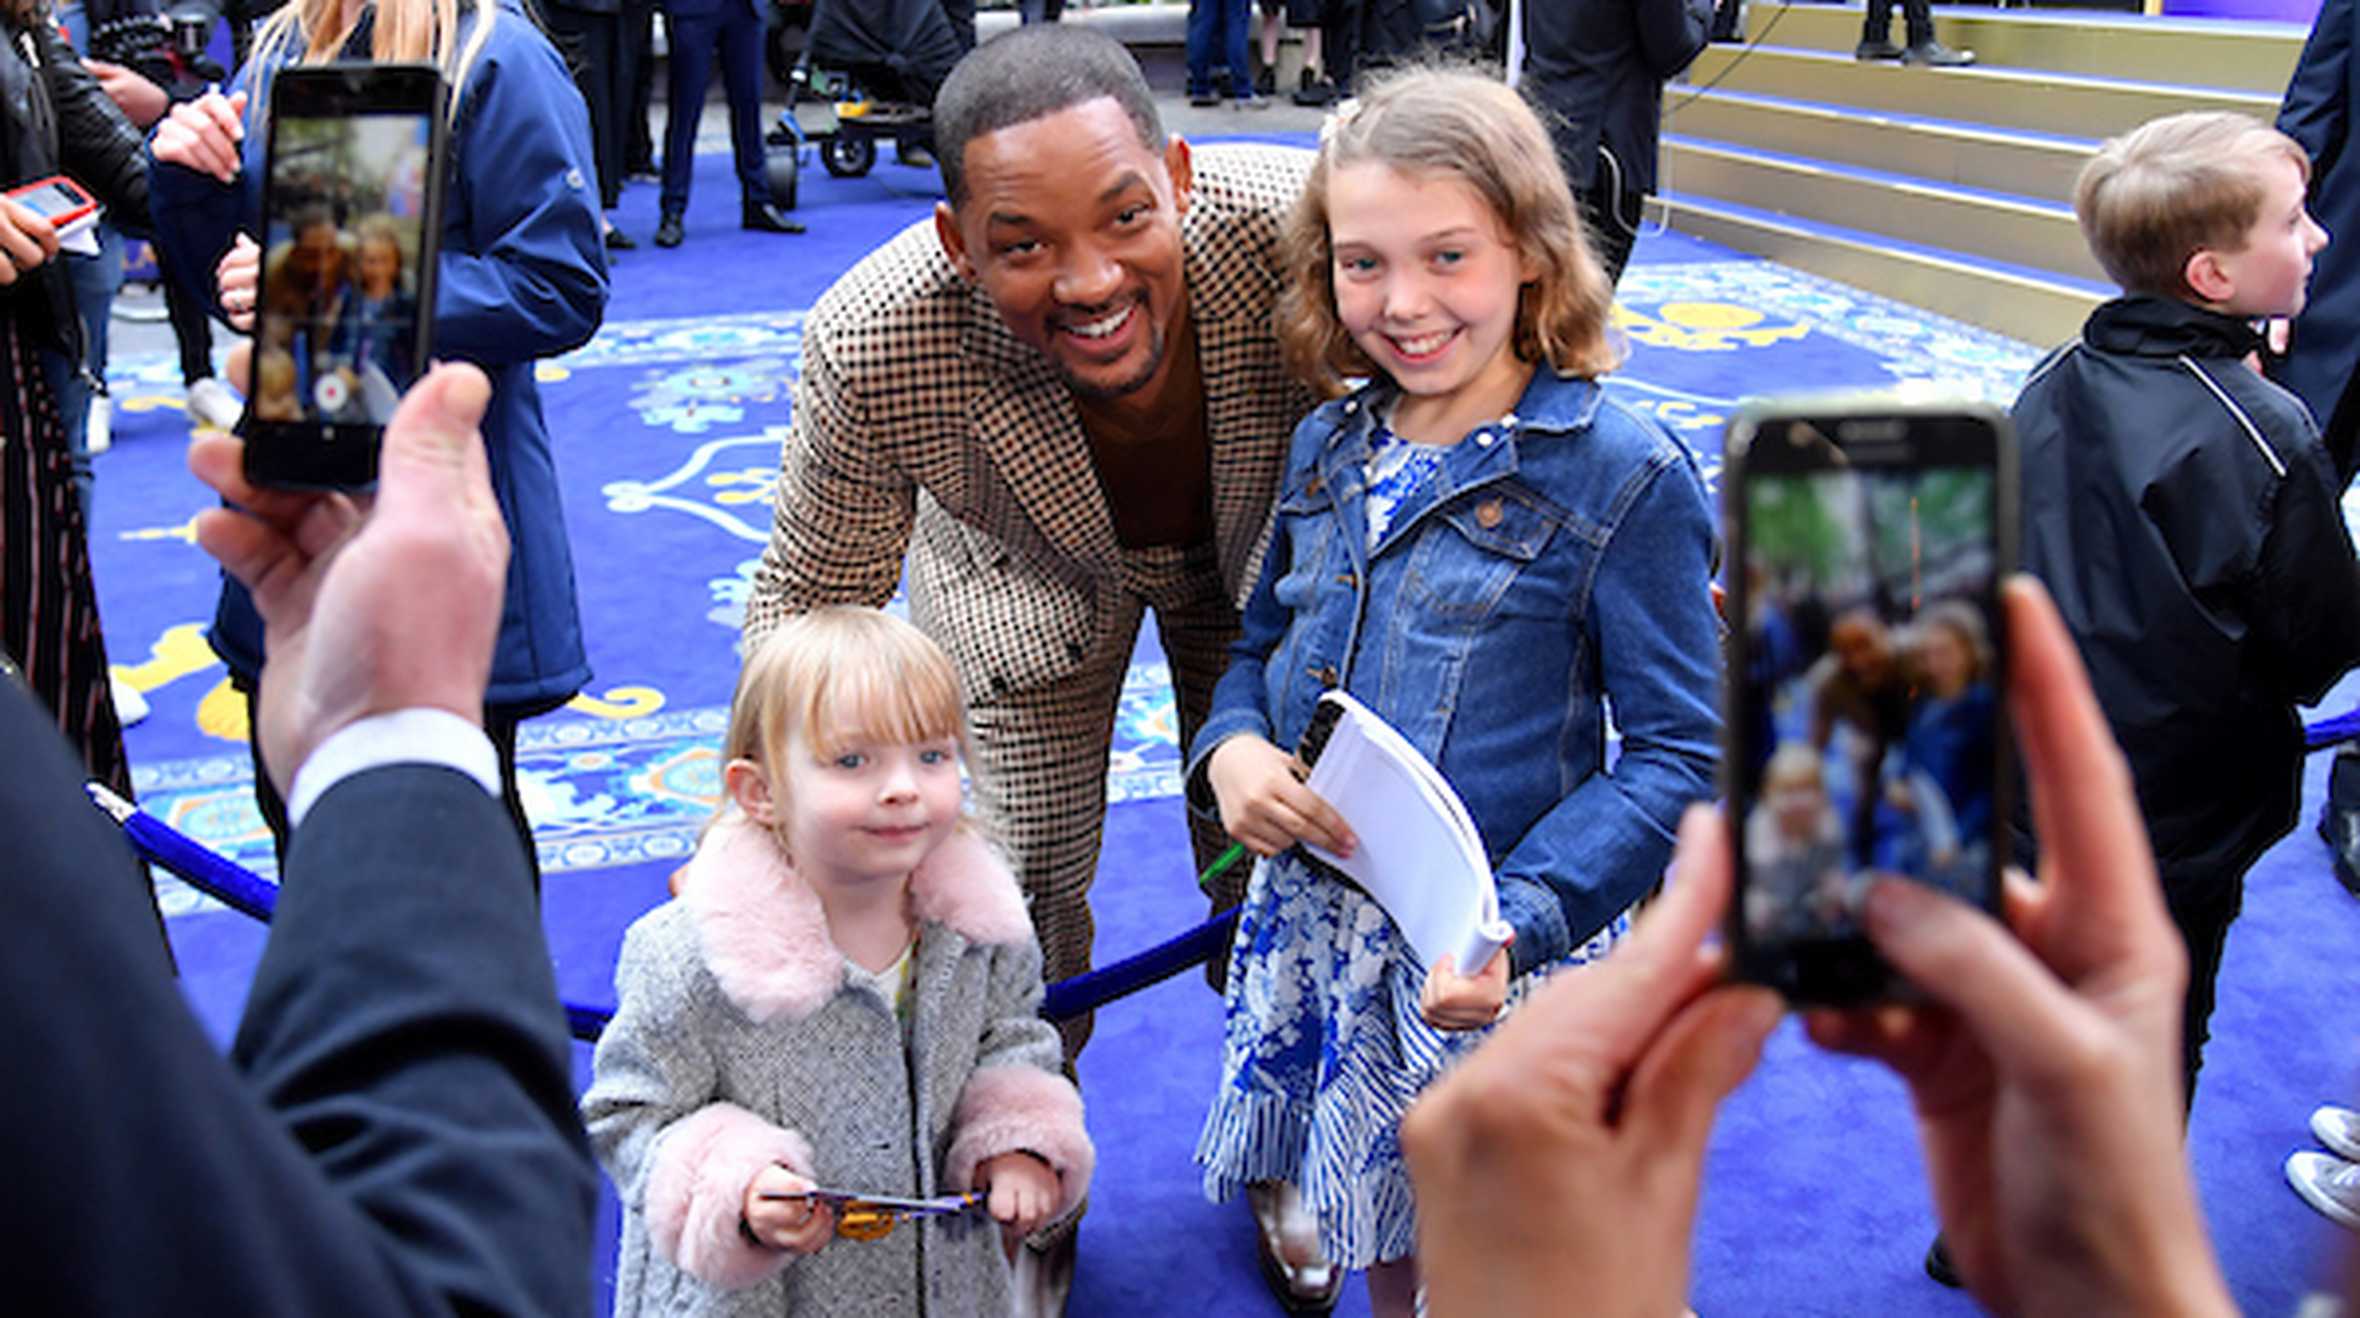 Emily and her sister with Will Smith on the carpet at the Aladdin Premier meeting Will Smith